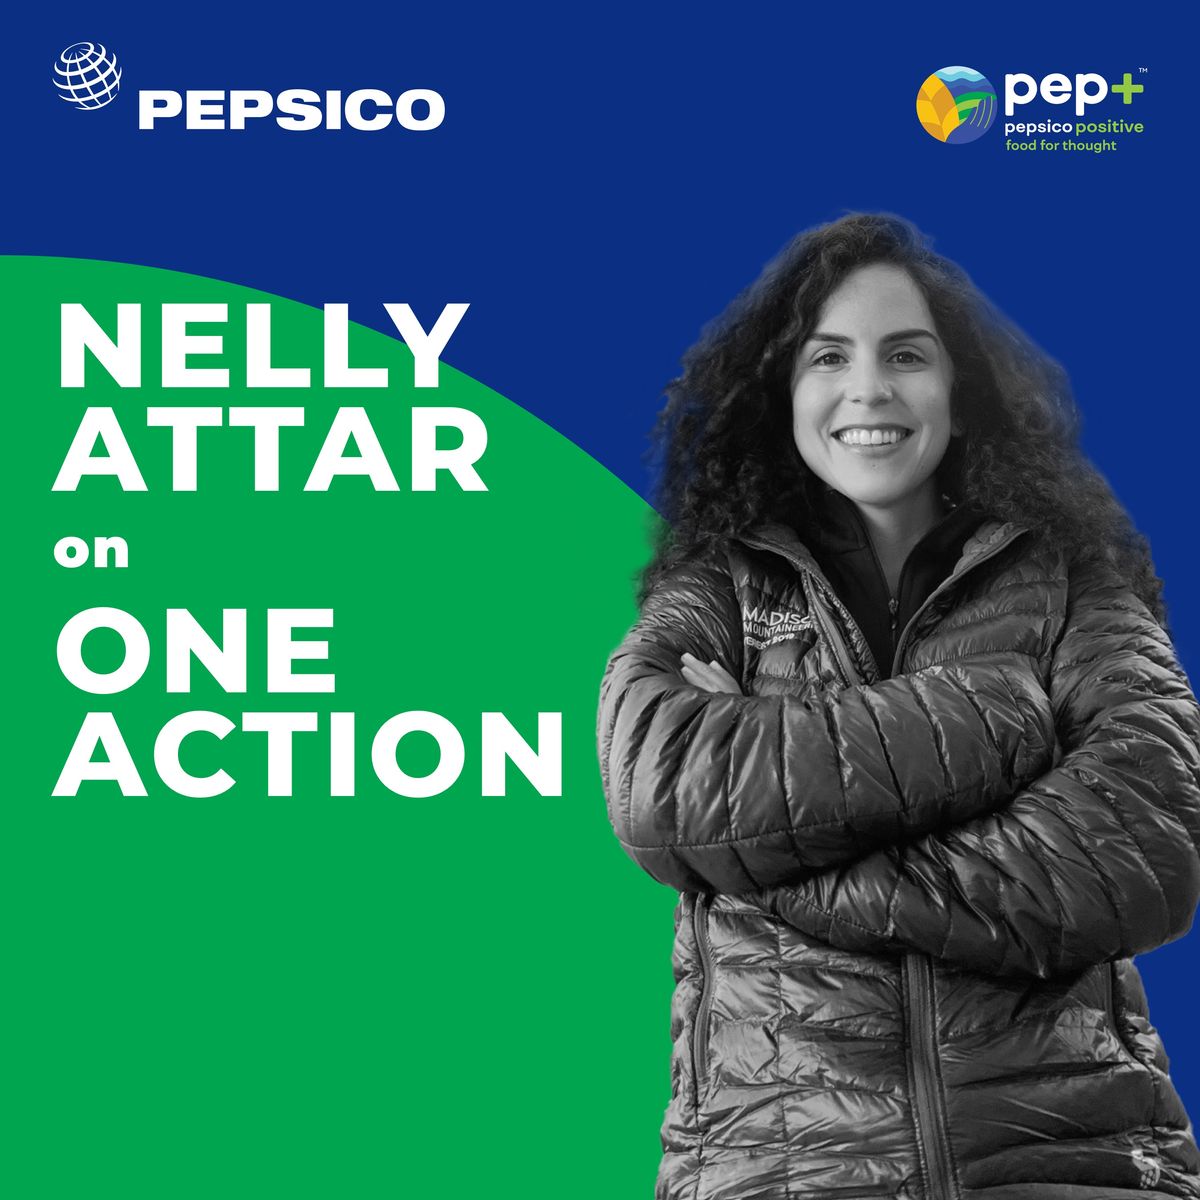 Athletes’ responsibility towards the environment, with Nelly Attar